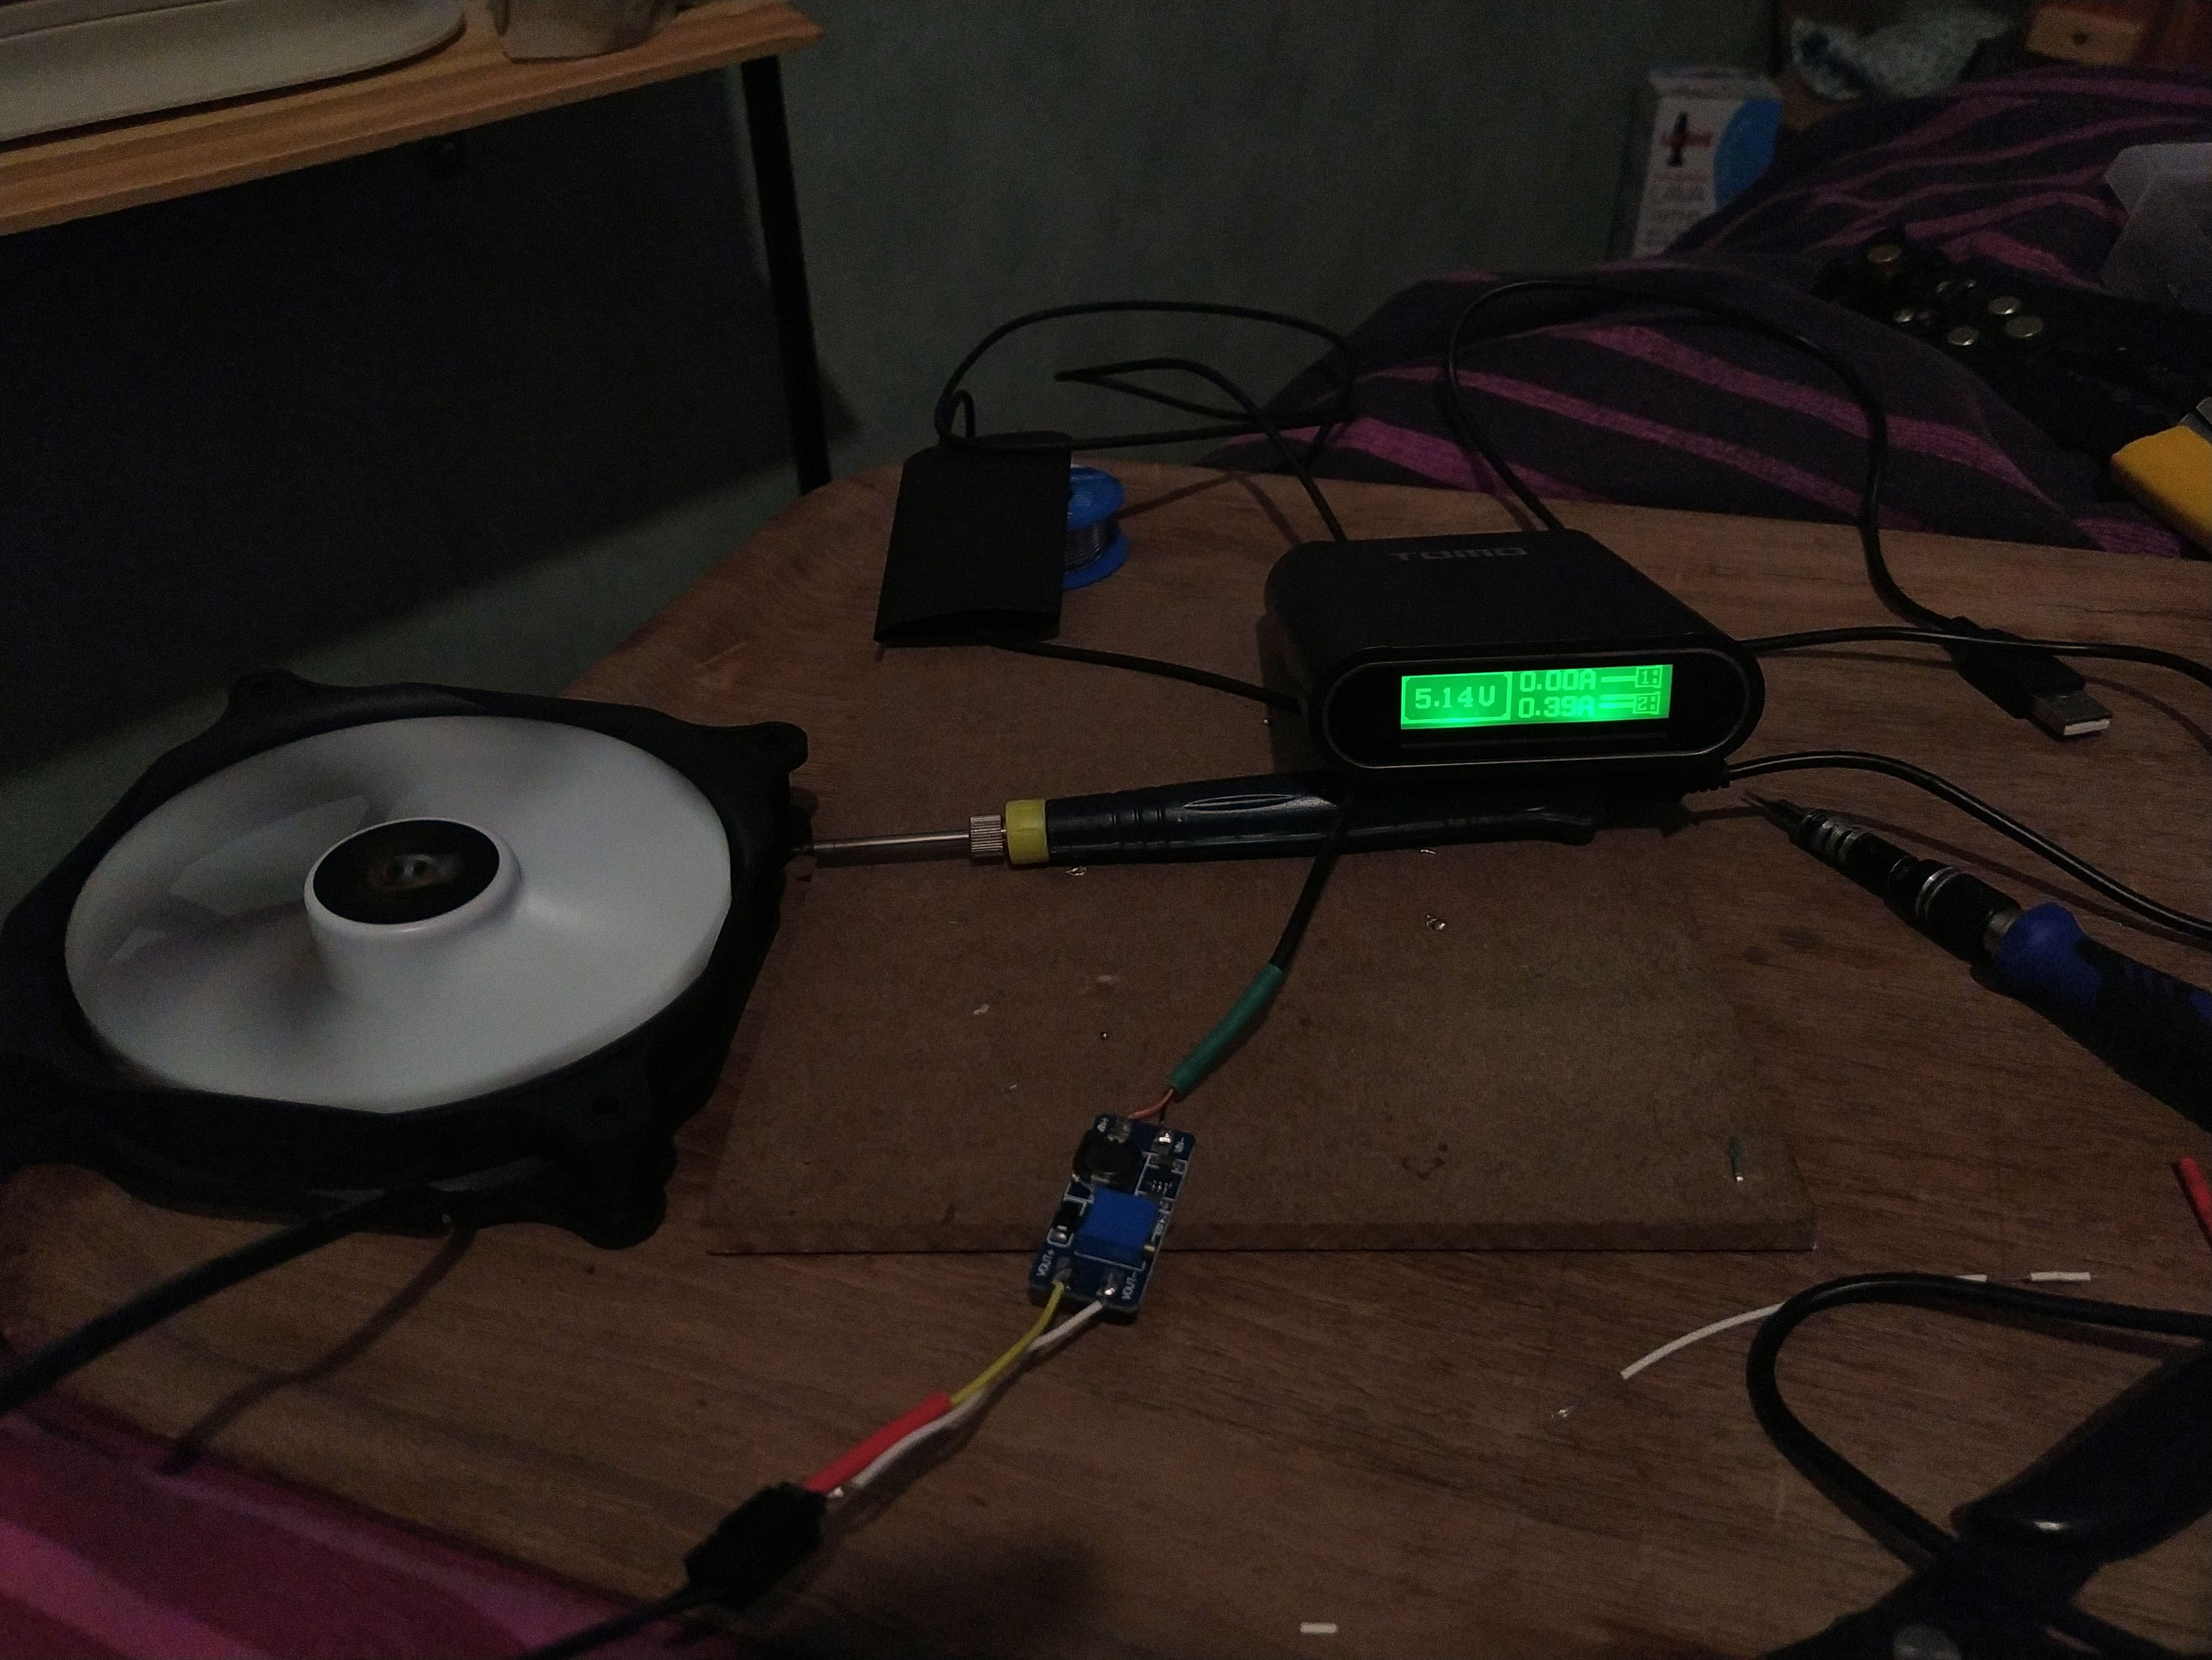 A 120mm fan, small soldering iron, USB power bank, and a circuit board on a small wooden tray, illustrative of how I built my custom 120mm fan